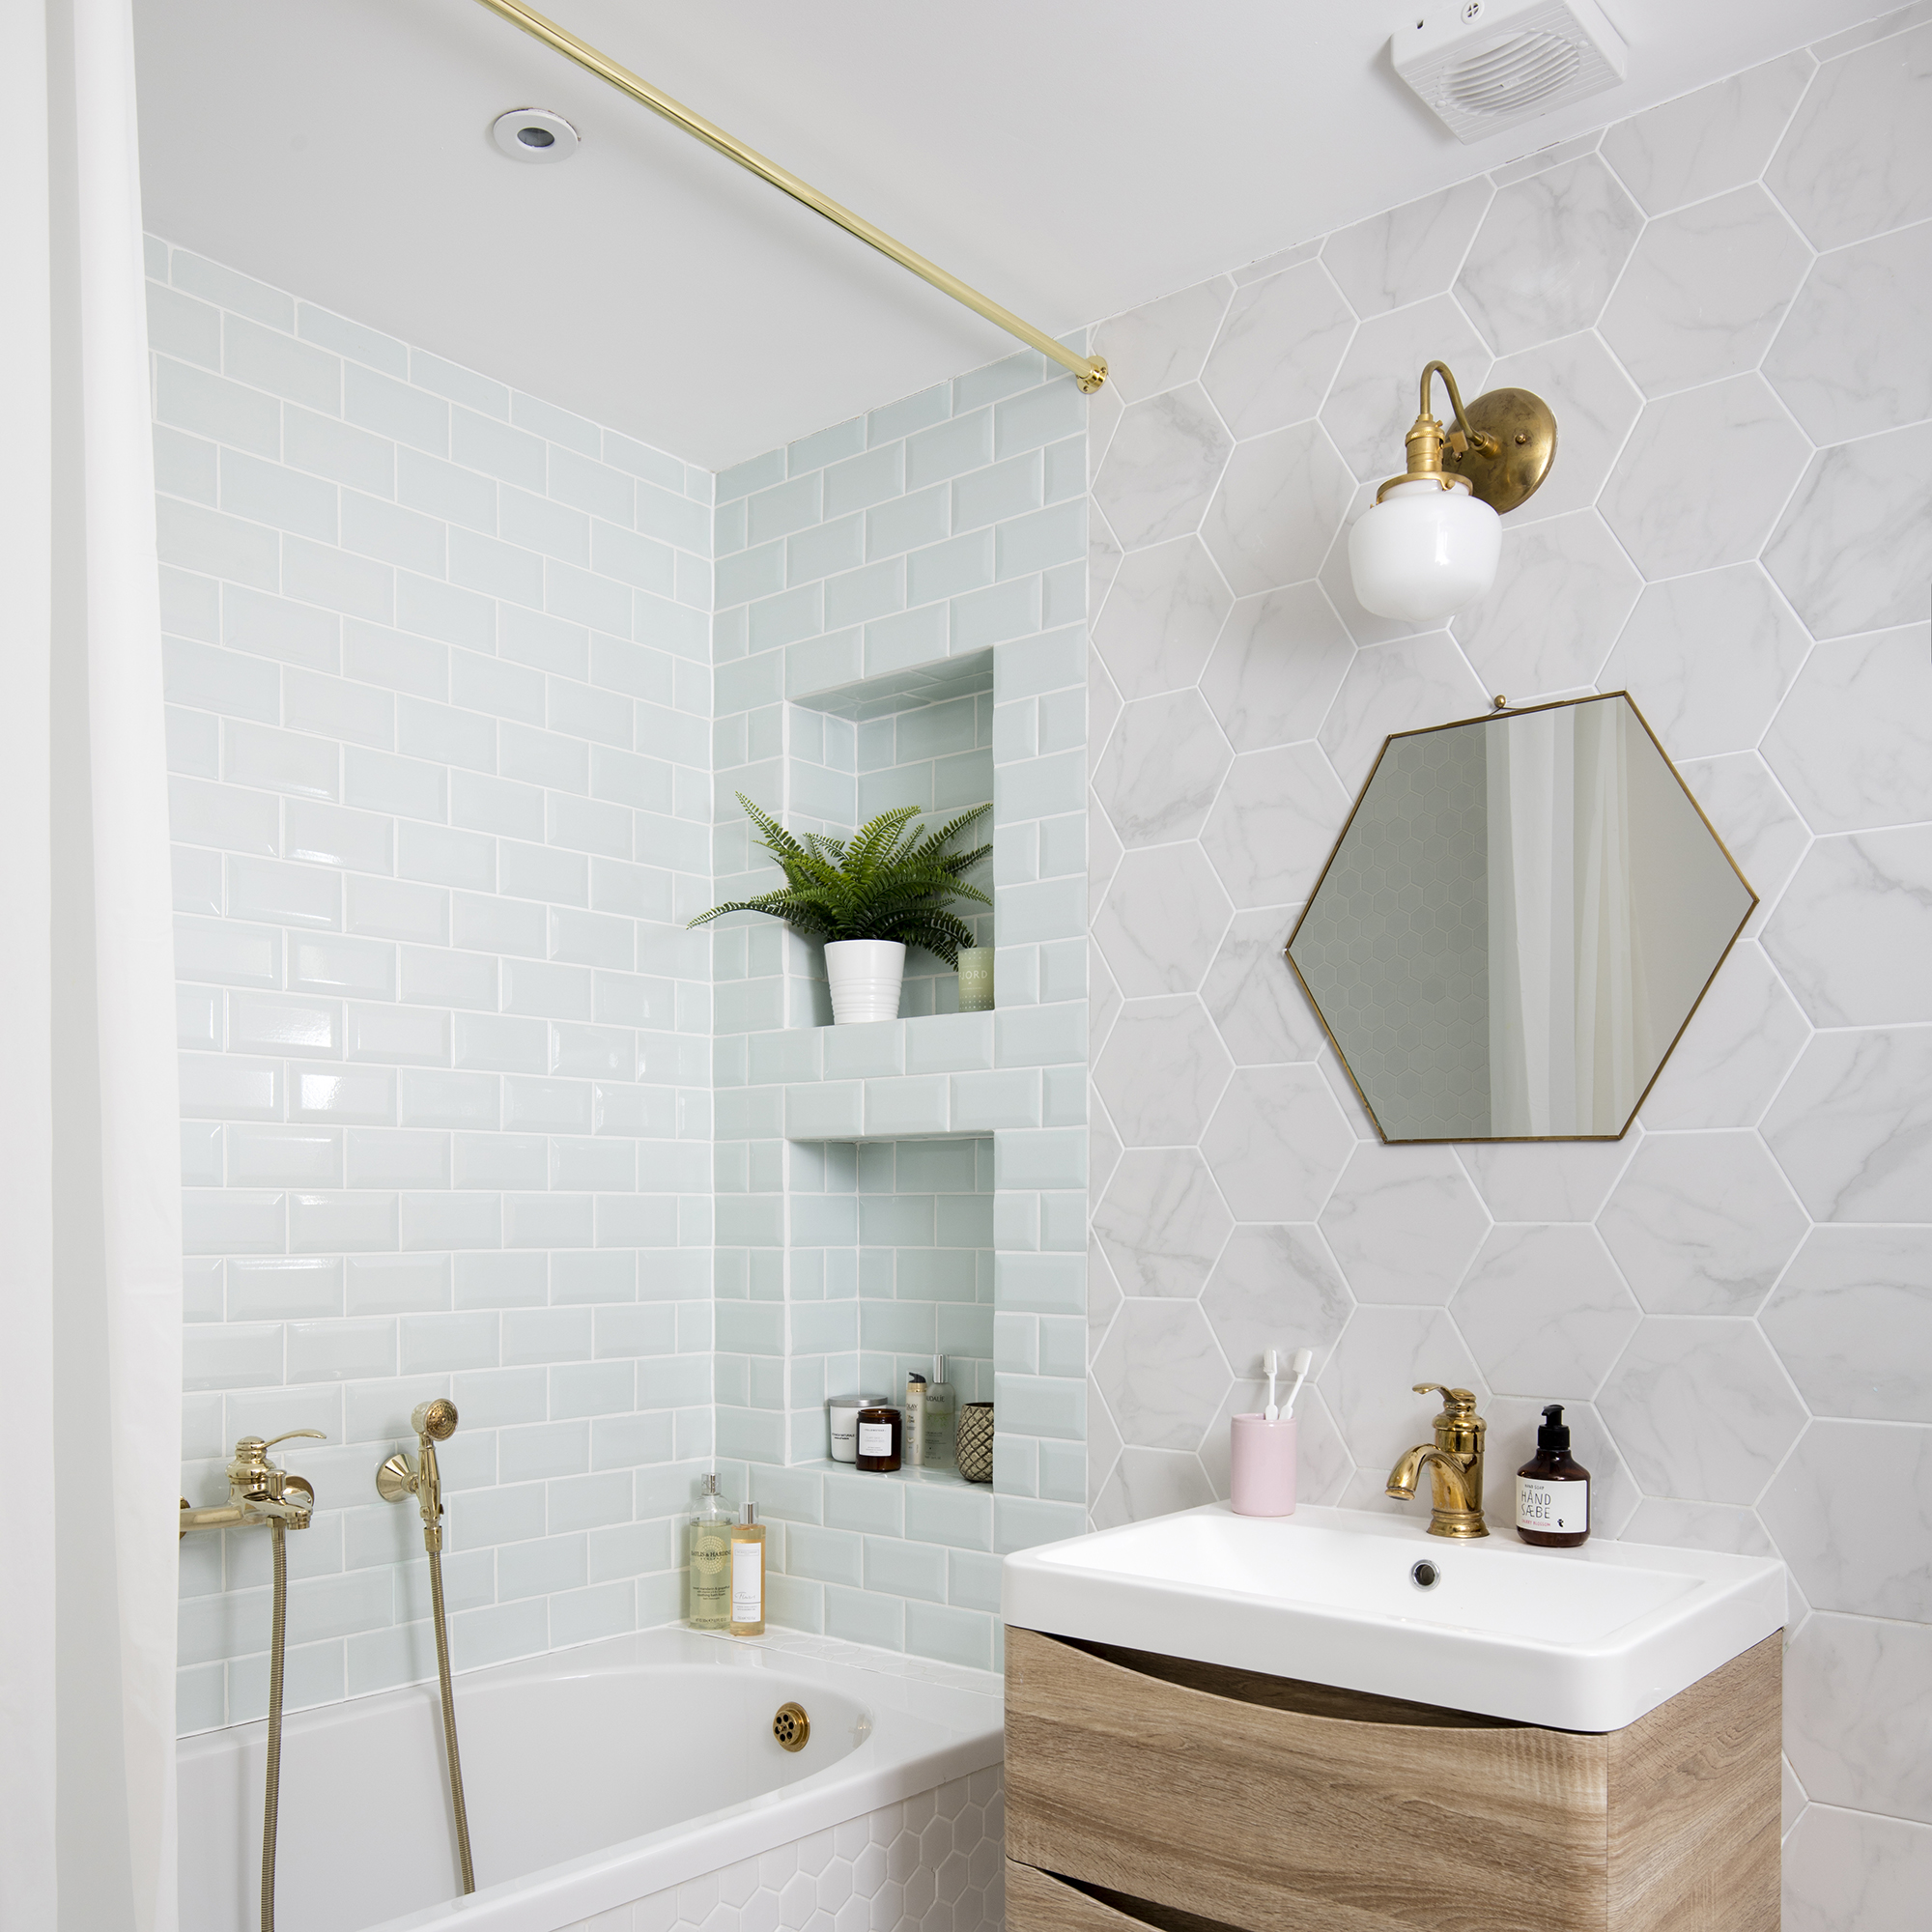 Bathroom with white wall and floor tiles, bathtub and golden mirror over wooden vanity unit.